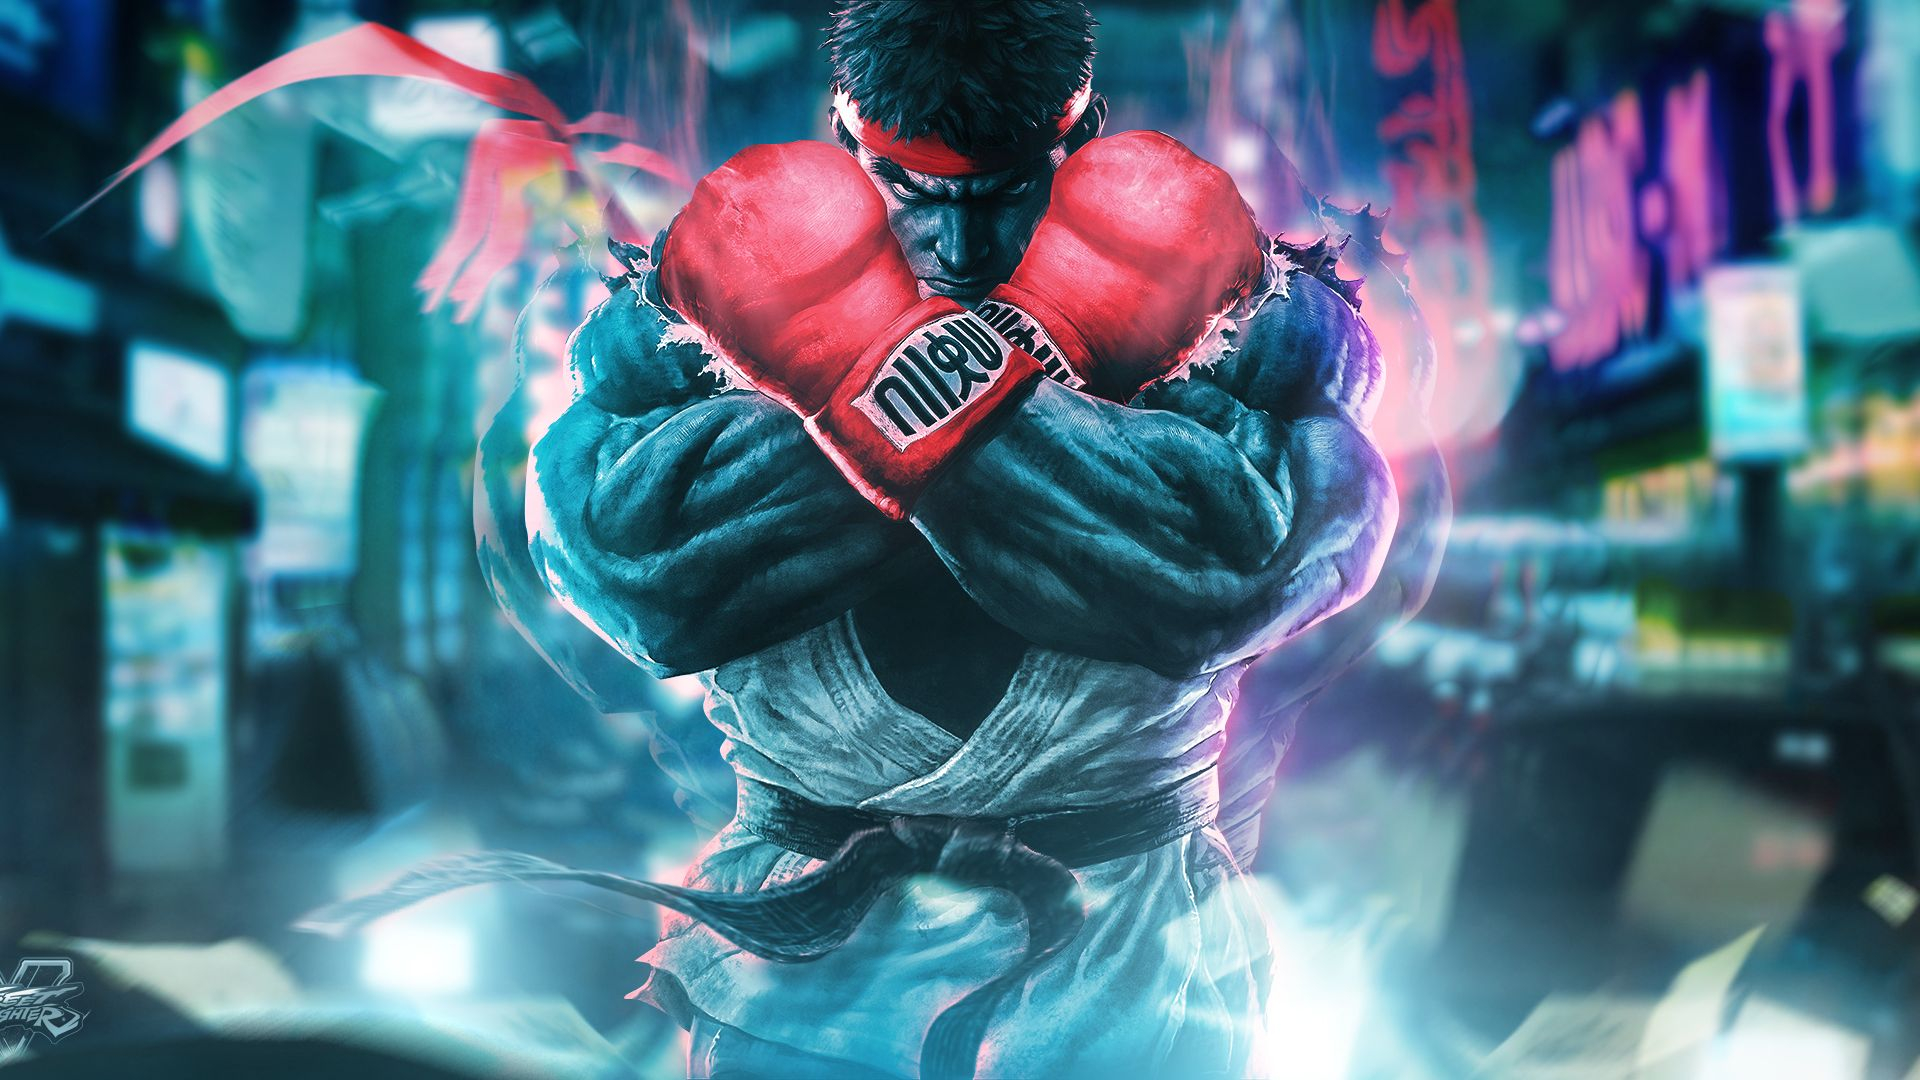 1920x1080 Desktop Wallpaper Ryu, Street Fighter Gaming, Hd Image, Picture, Background, Bderax